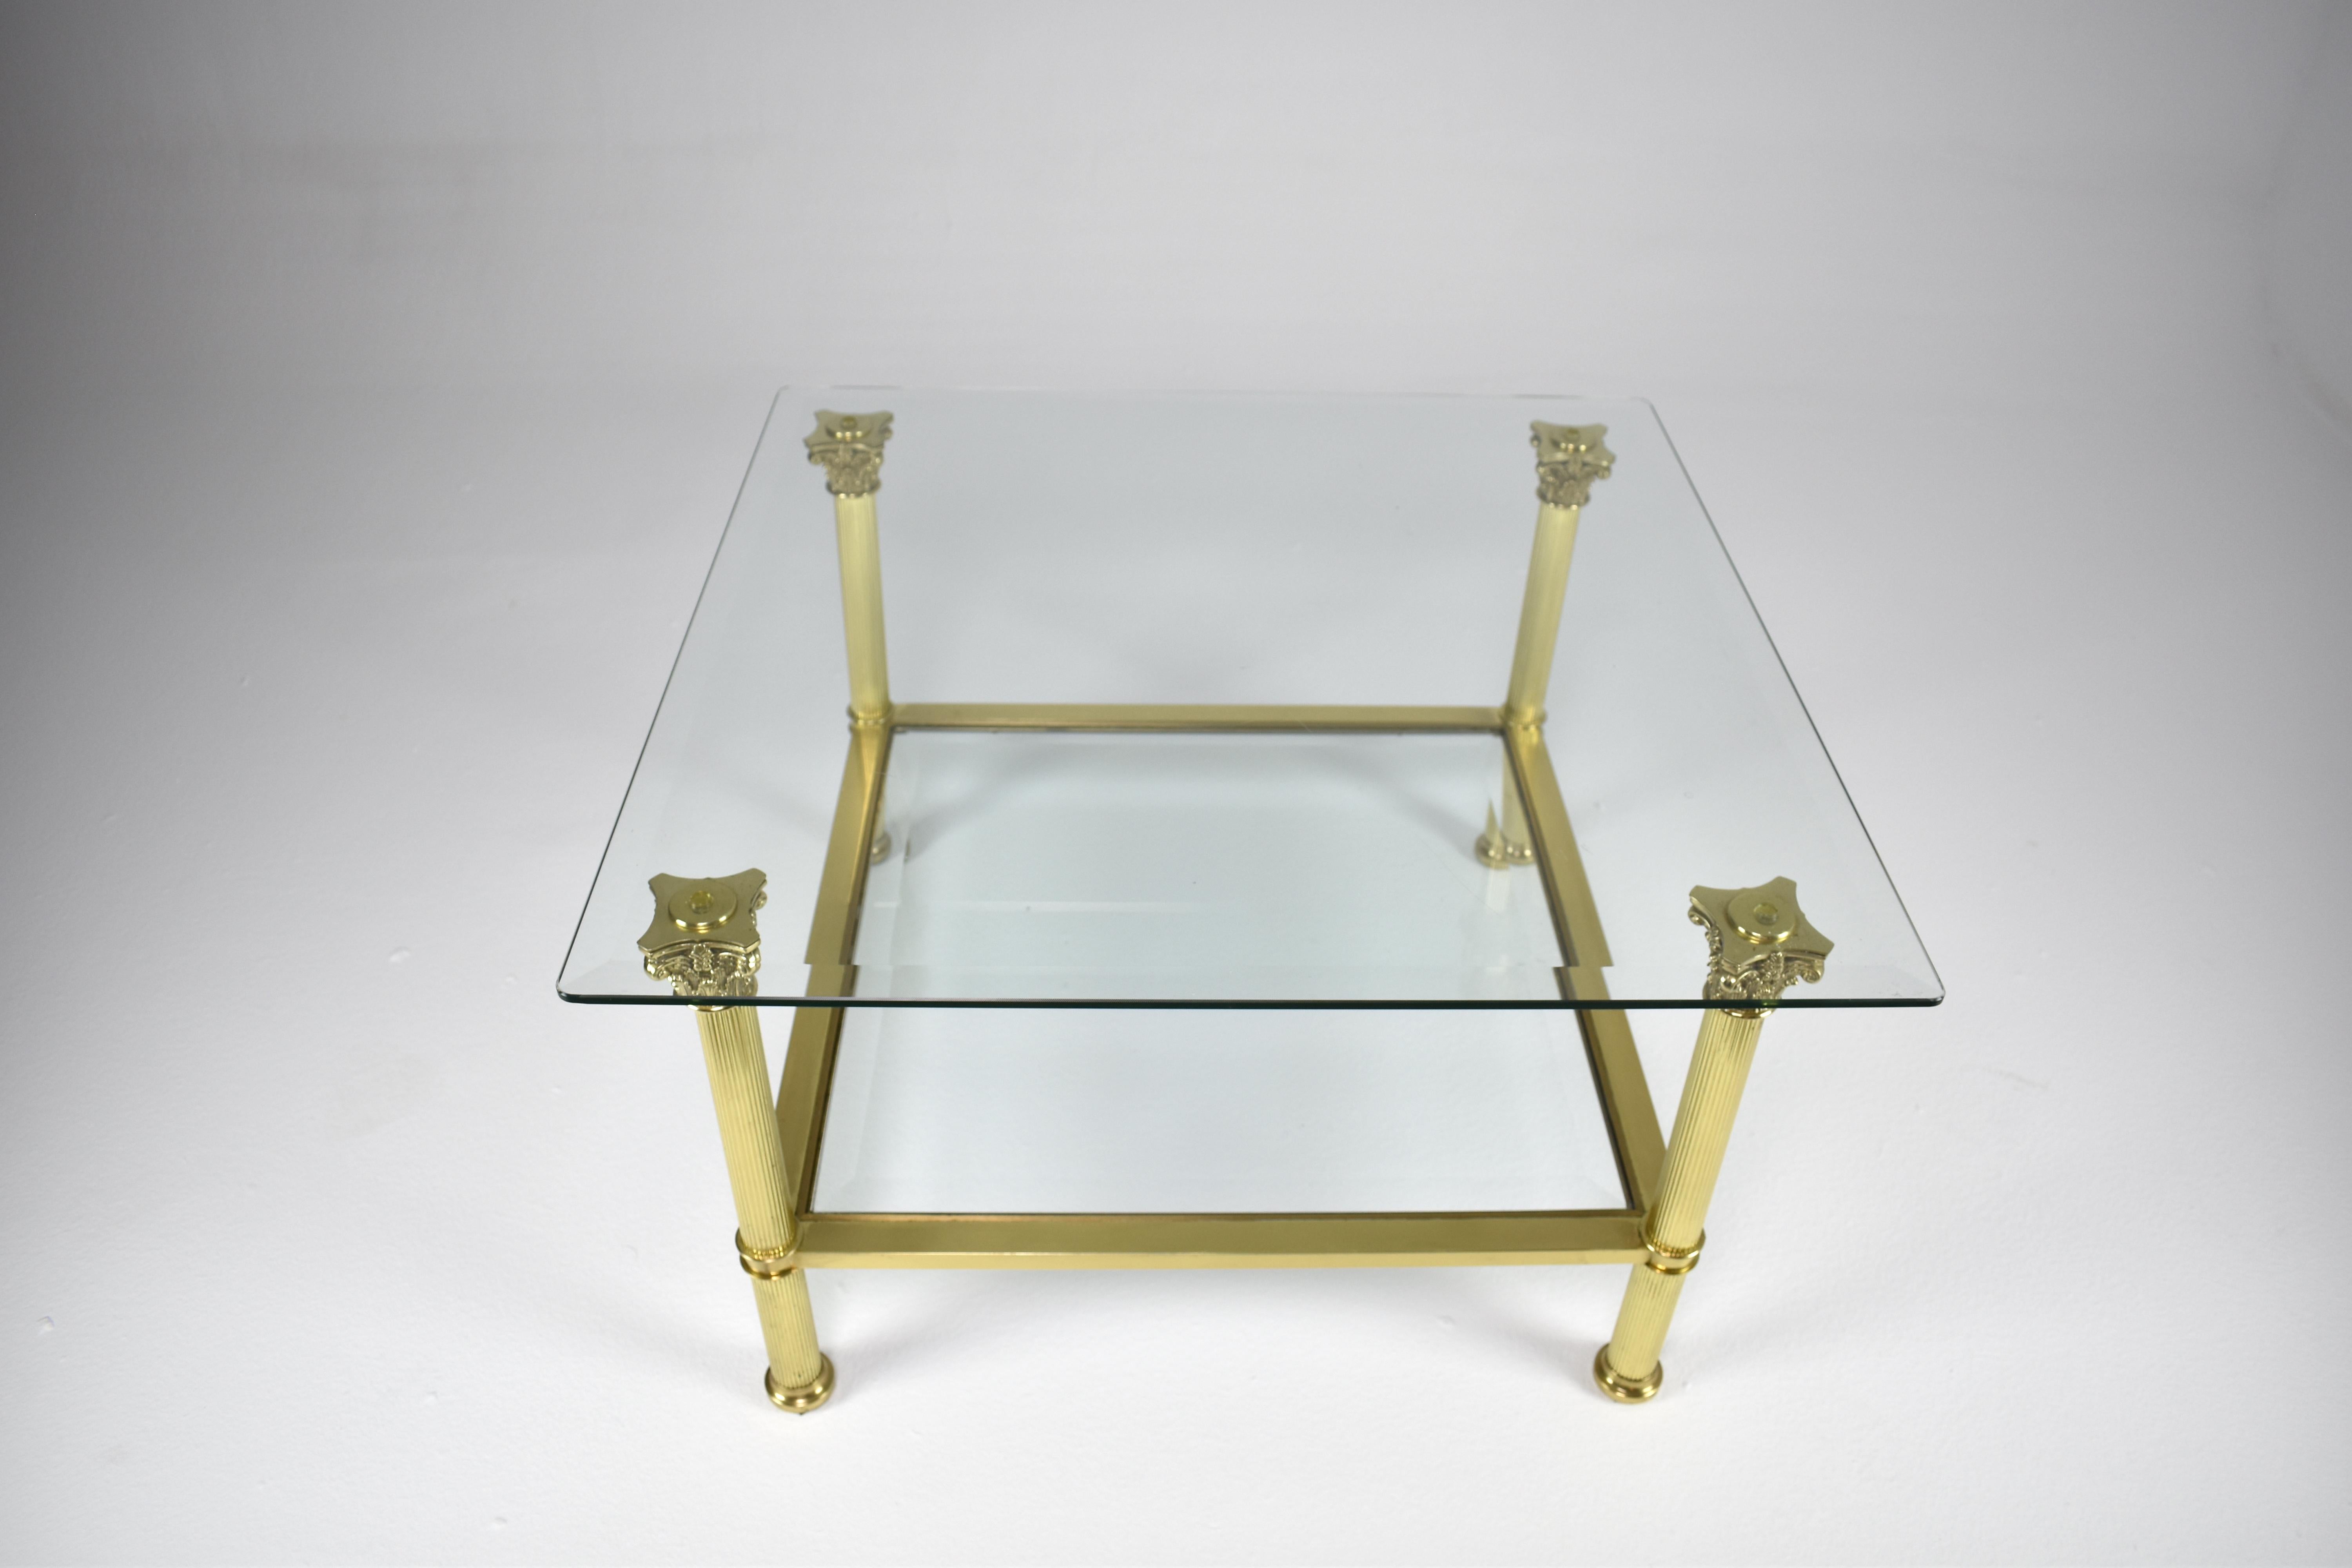 Pair of French Hollywood Regenc Coffee Tables Attributed to Maison Jansen, 1980s For Sale 6